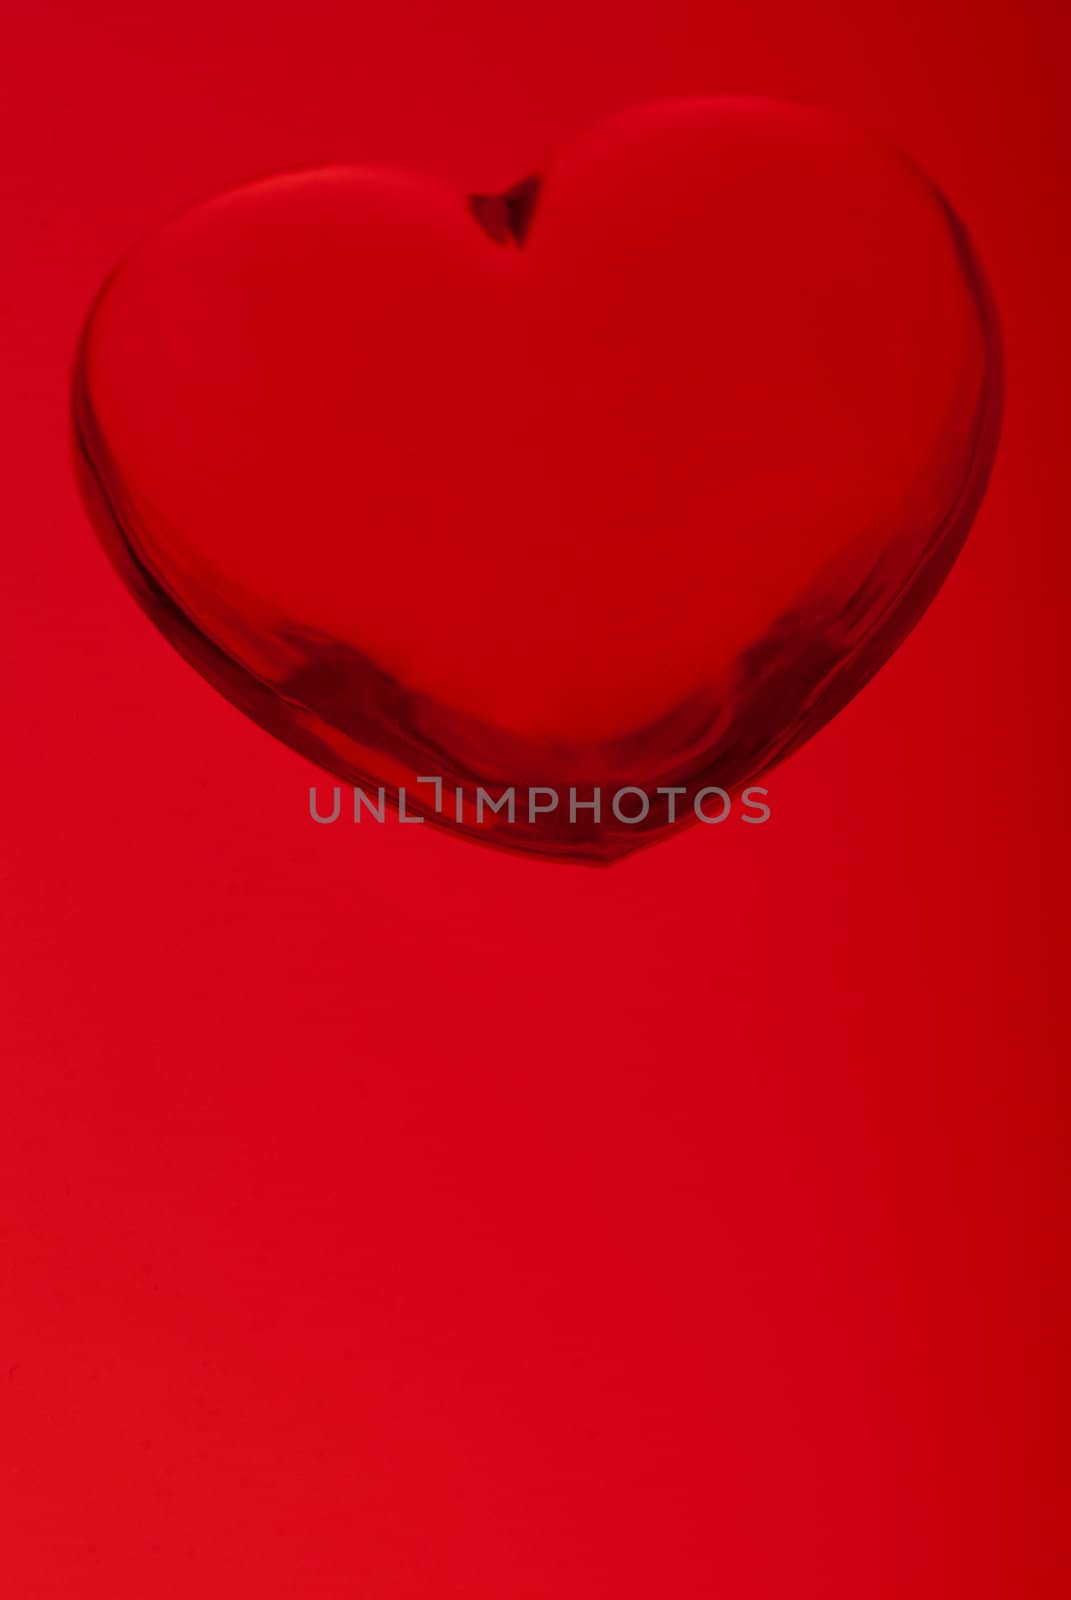 Acrylic heart shape miniature, great for Valentine's day background designs.